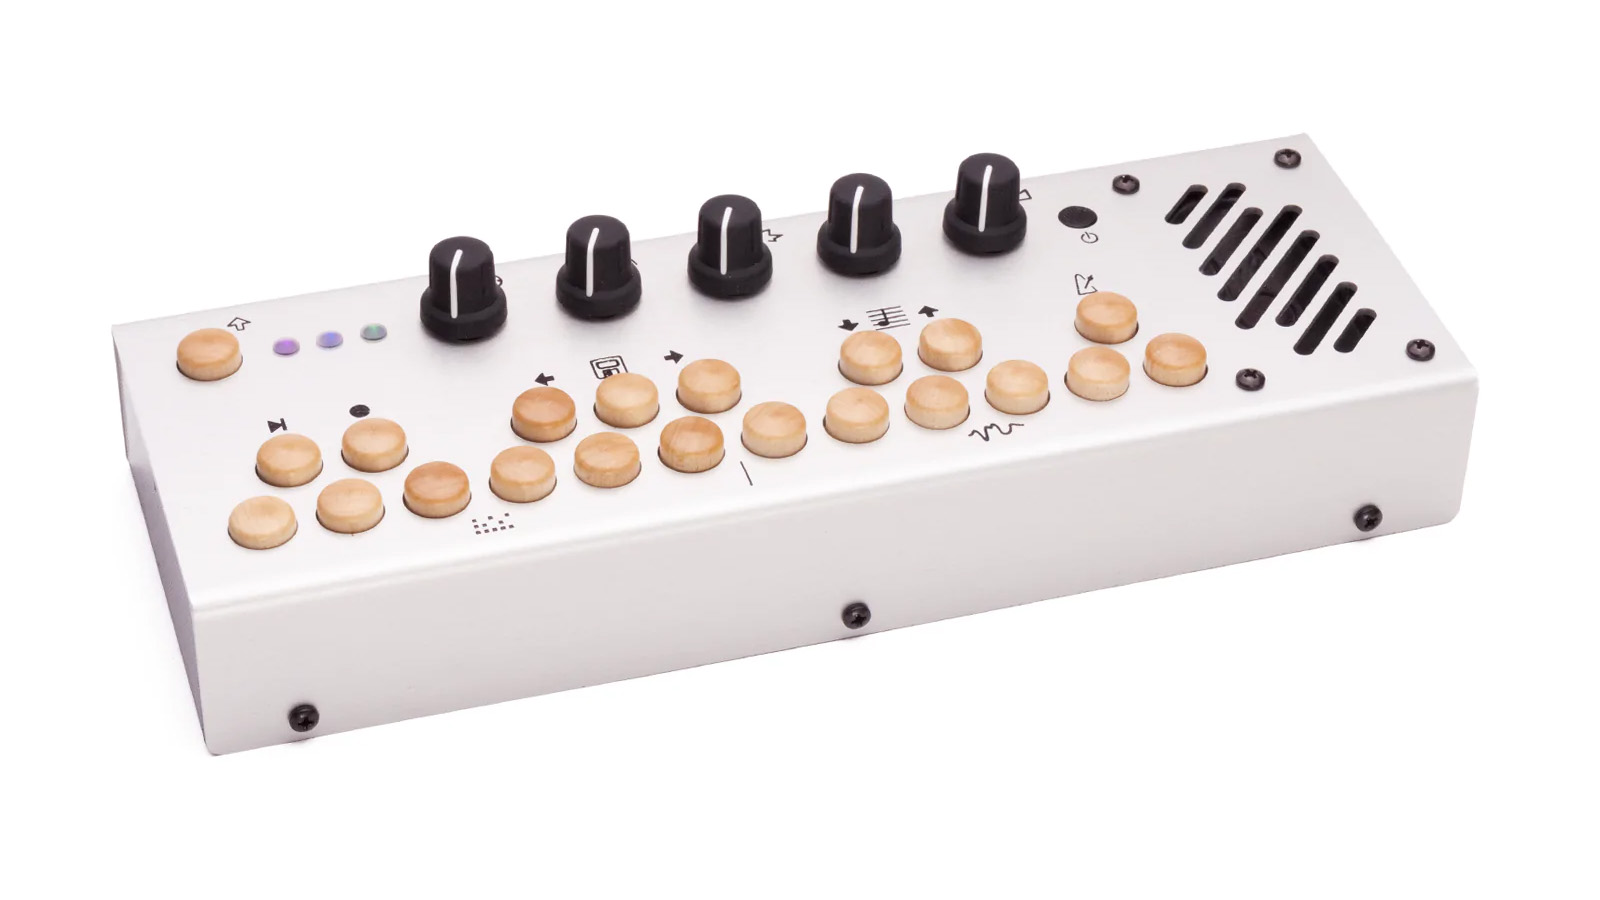 Critter & Guitari’s 201 Music Synthesizer is the long-awaited successor to its Pocket Piano